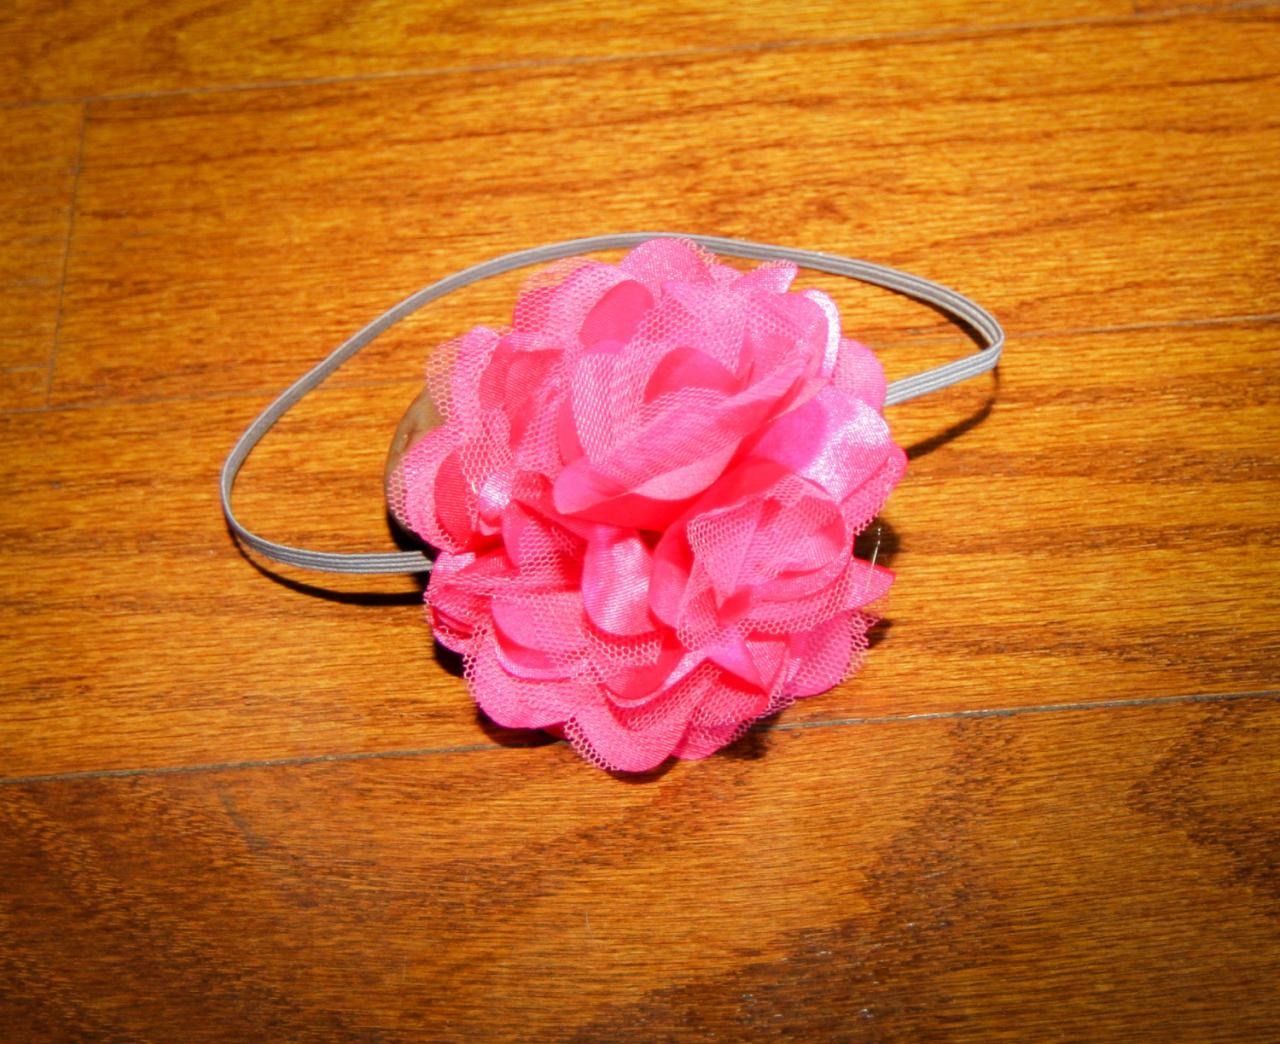 Headband-halo-- & Pink! This Hair Accessory Is So Now With Its Large Flower And Grey Elastic!